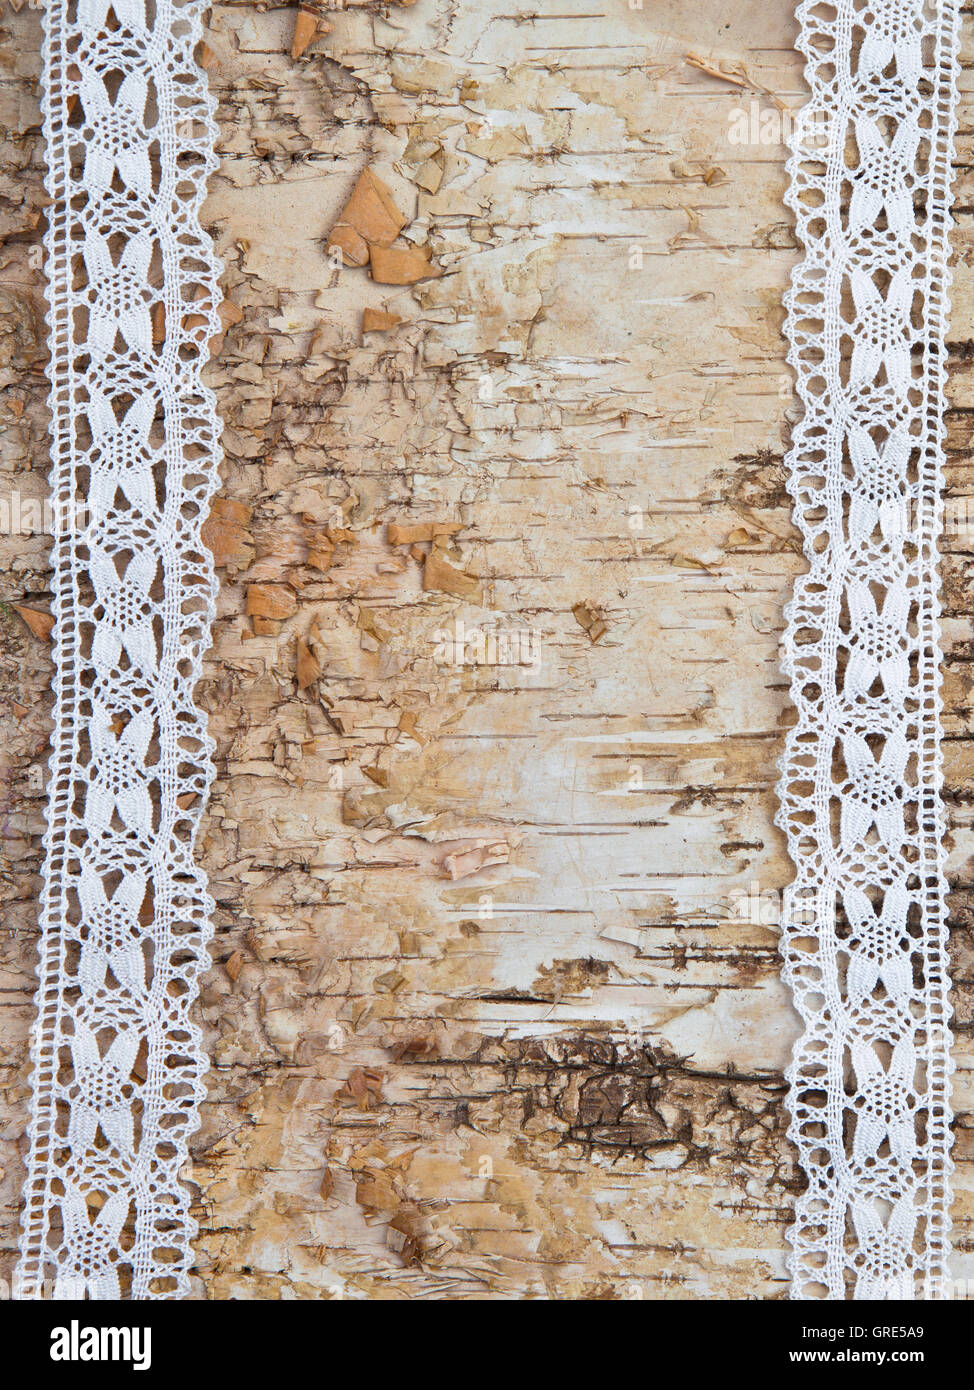 Wooden background with white lace Stock Photo